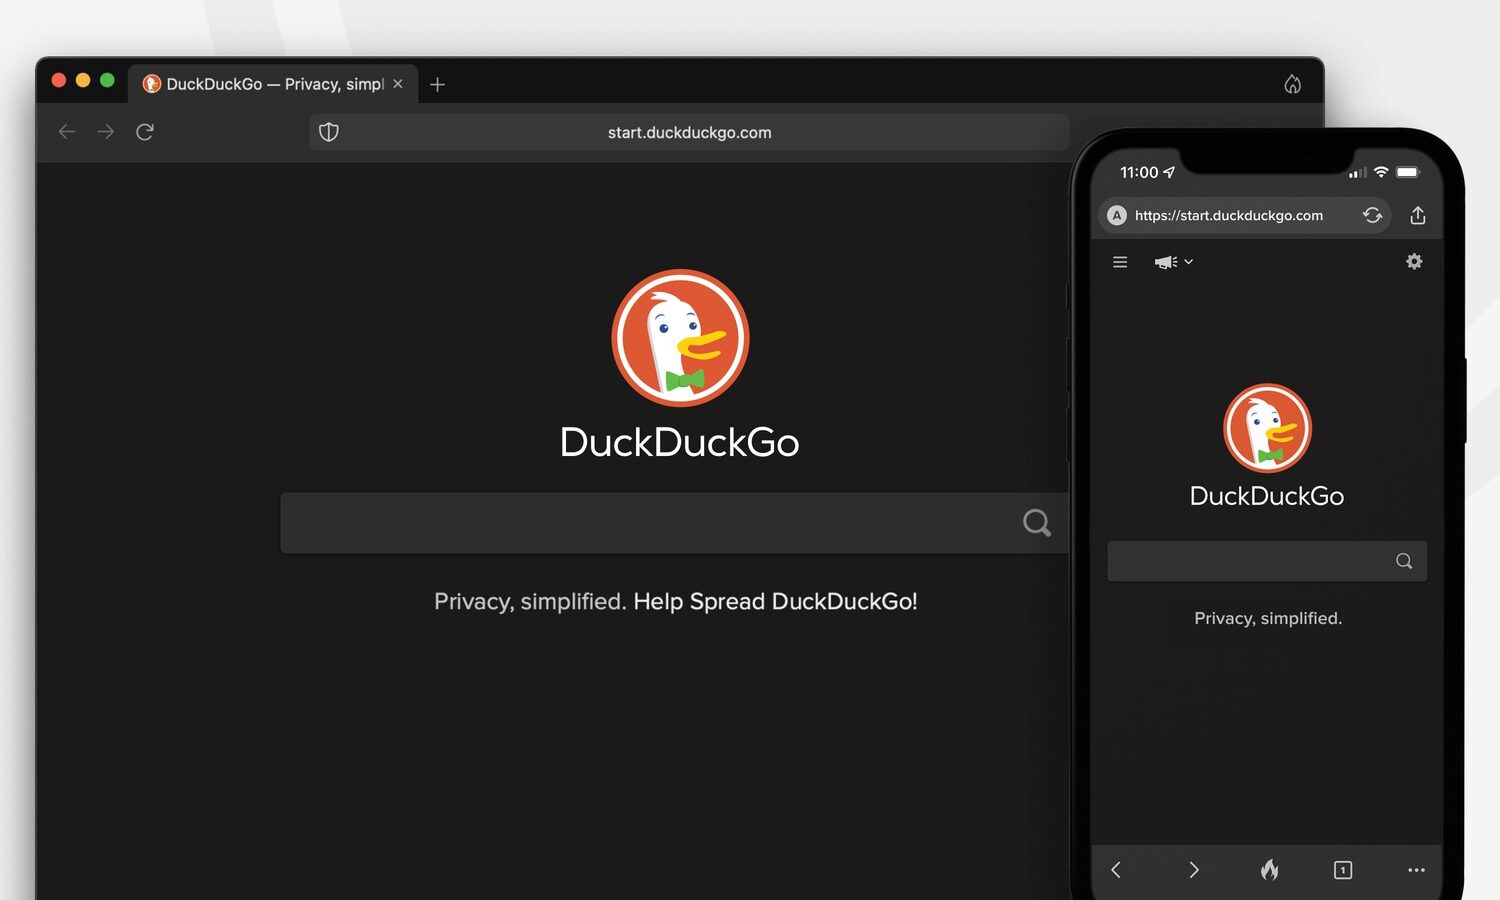 Promotional image showing the DuckDuckGo browser on Mac and iPhone